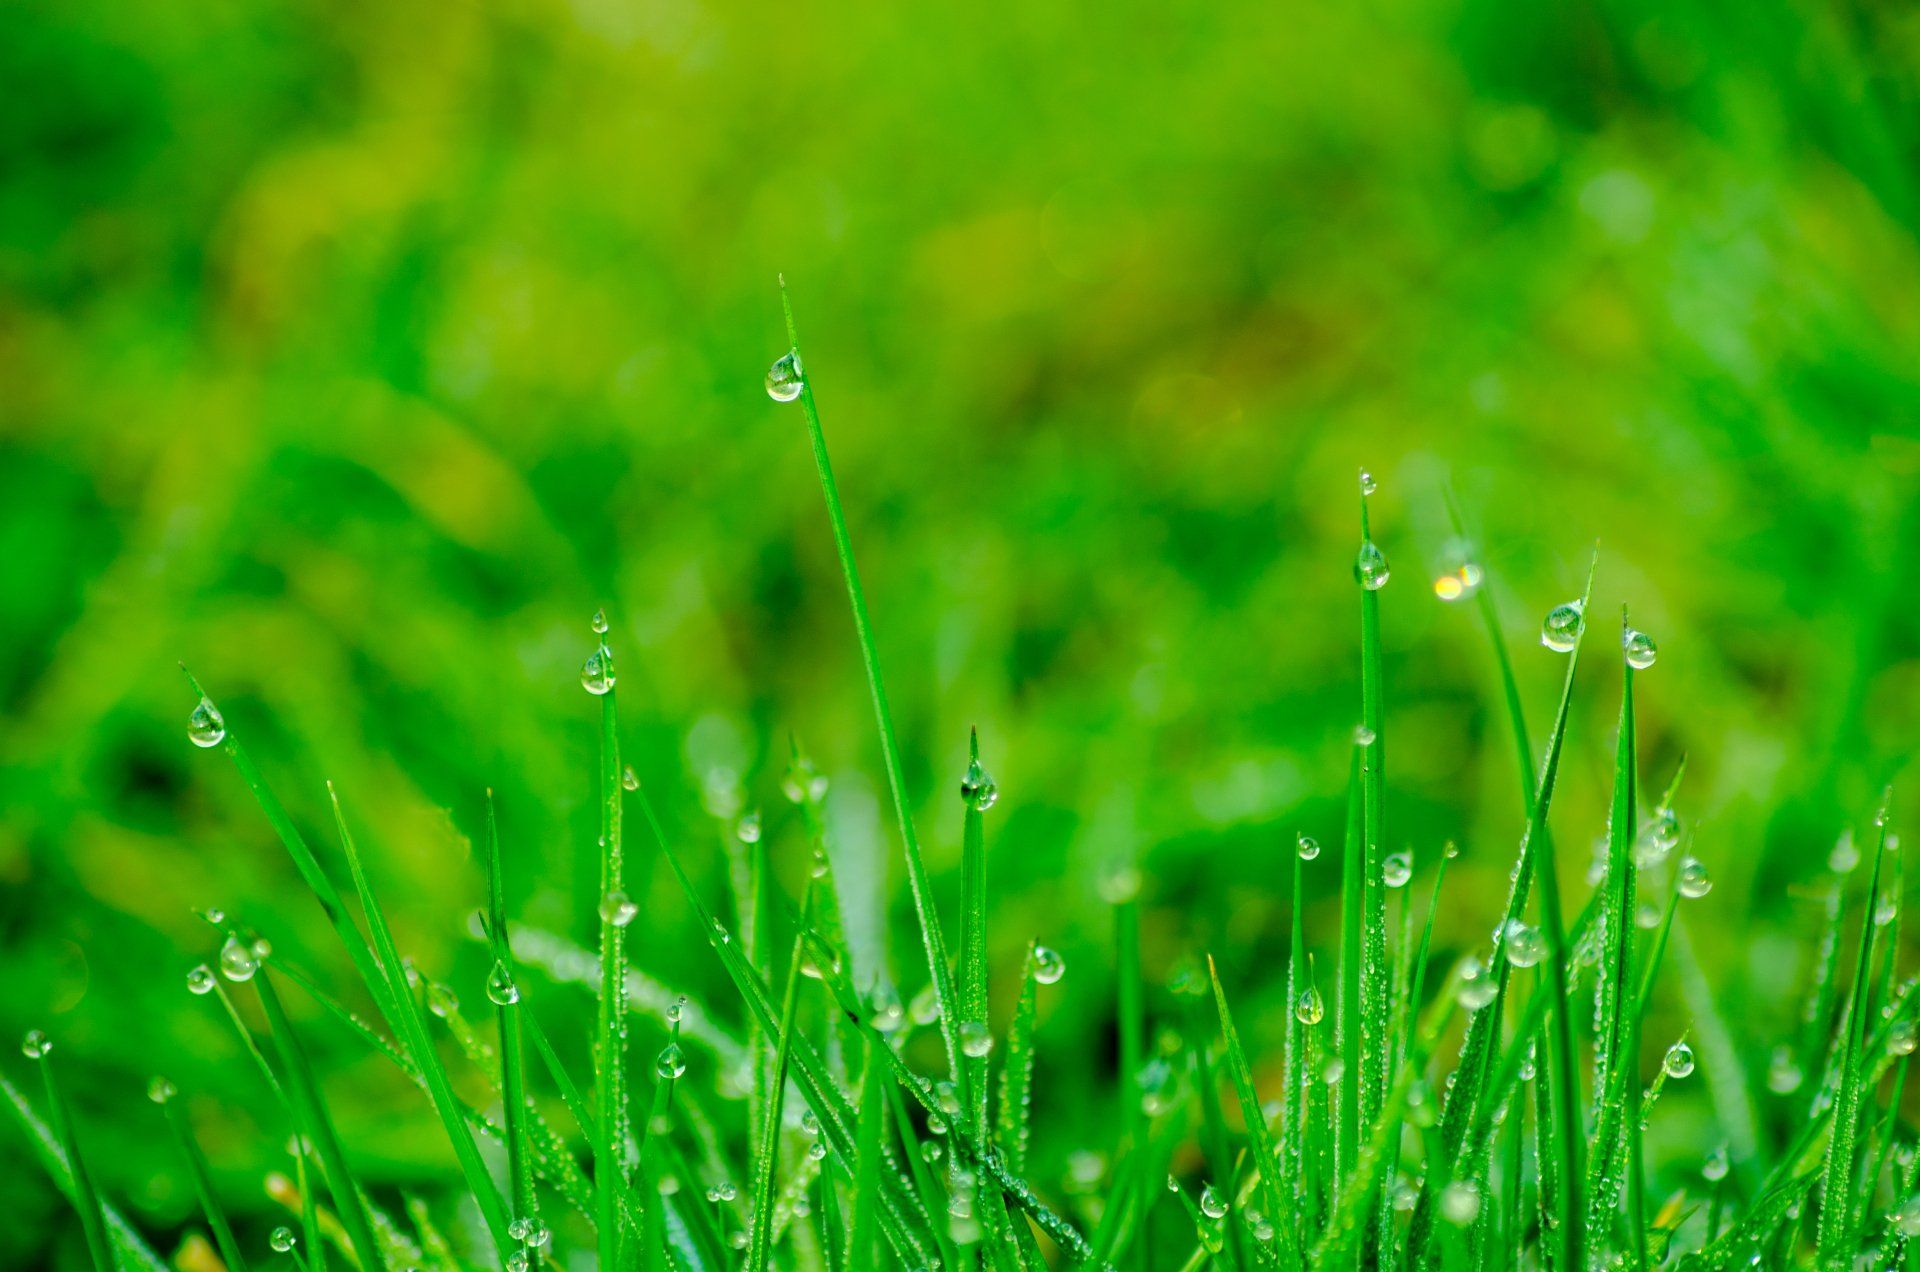 A close up of a lush green field of grass with water drops on it.